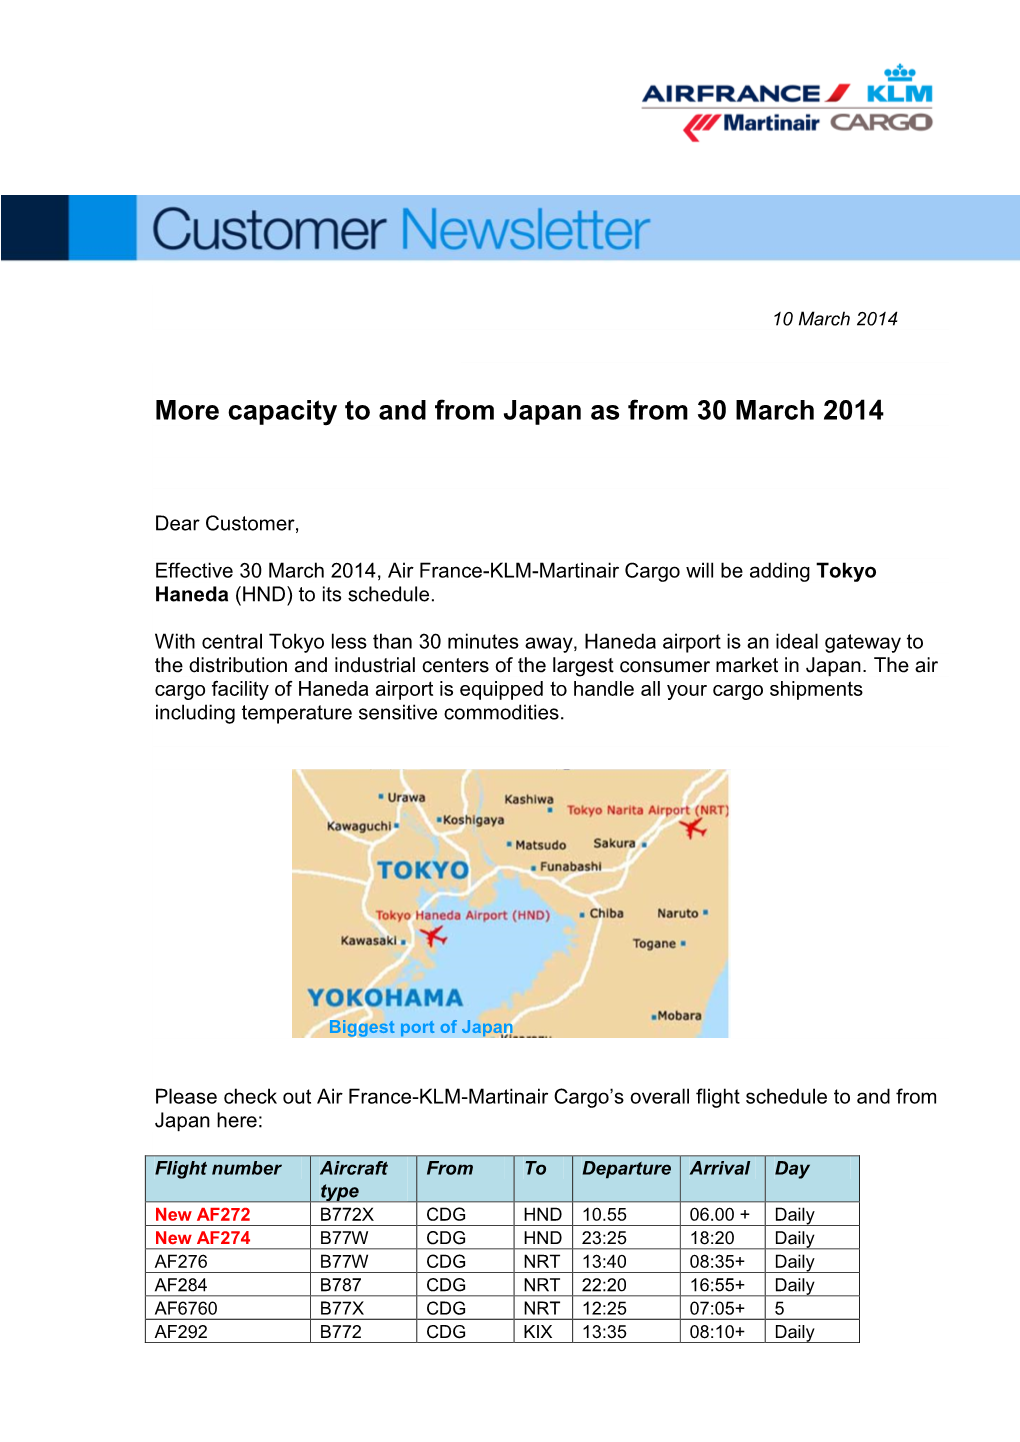 Capacity to and from Japan As from 30 March 2014